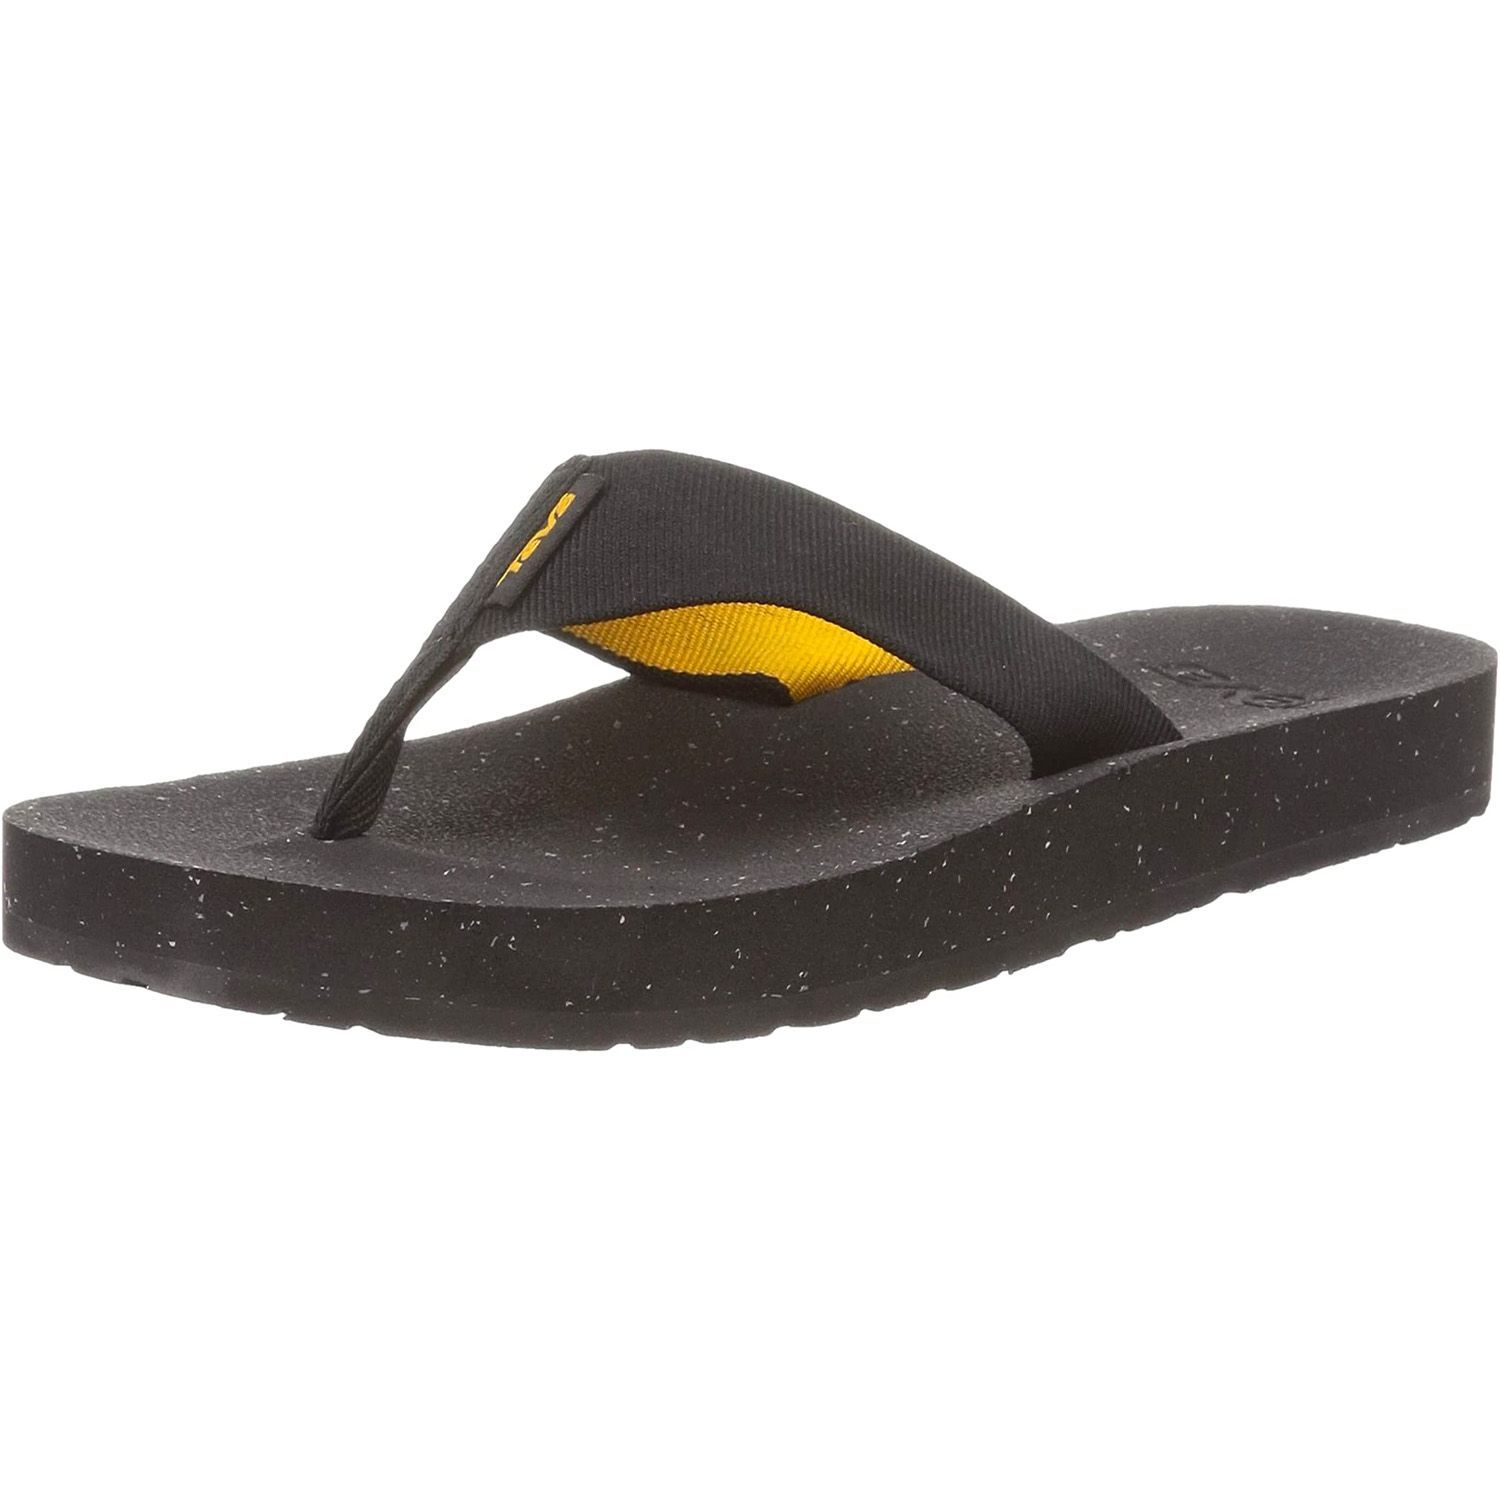 Yes, These Flip-Flops With Arch Support Are Truly Good for Your Feet